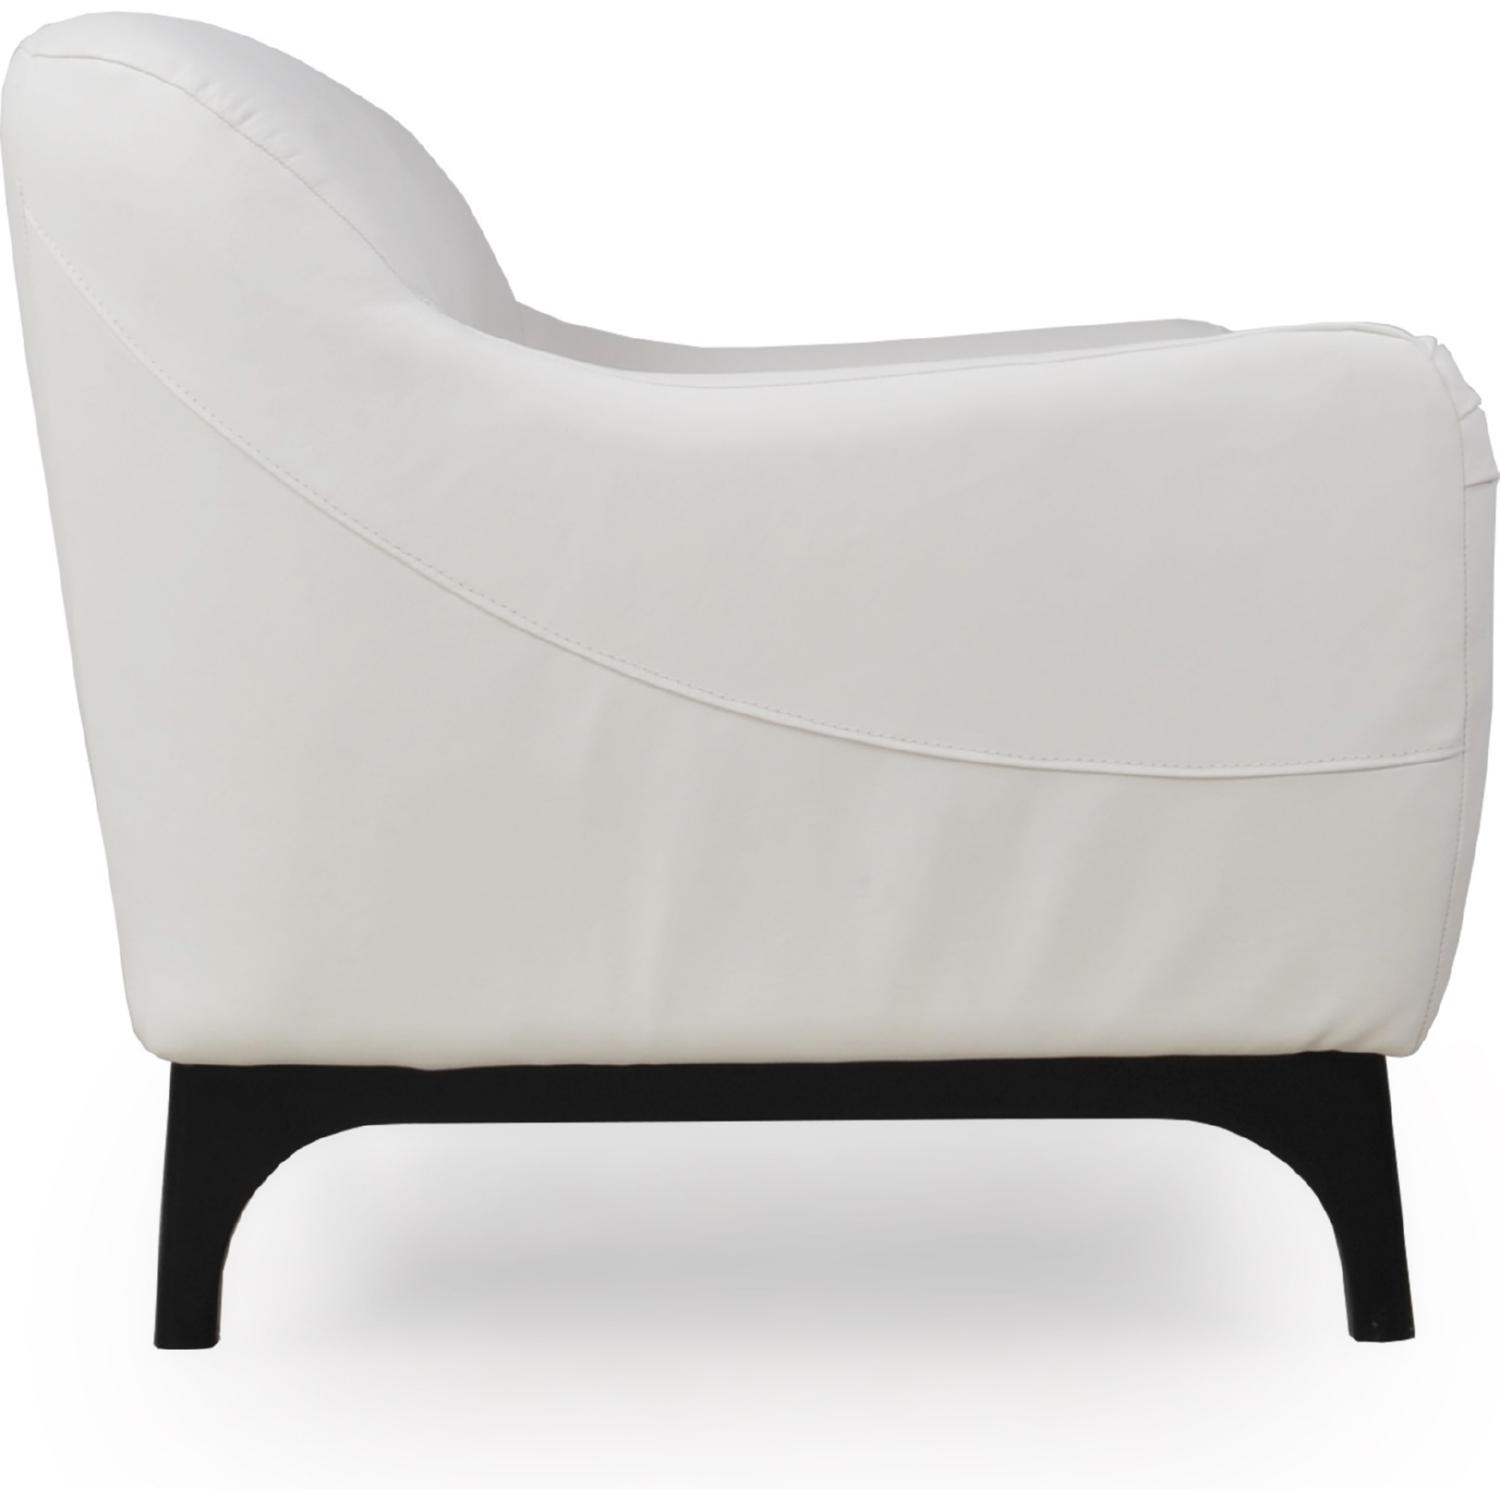 

                    
Moroni Wollo 357 Arm Chairs White Top grain leather Purchase 
